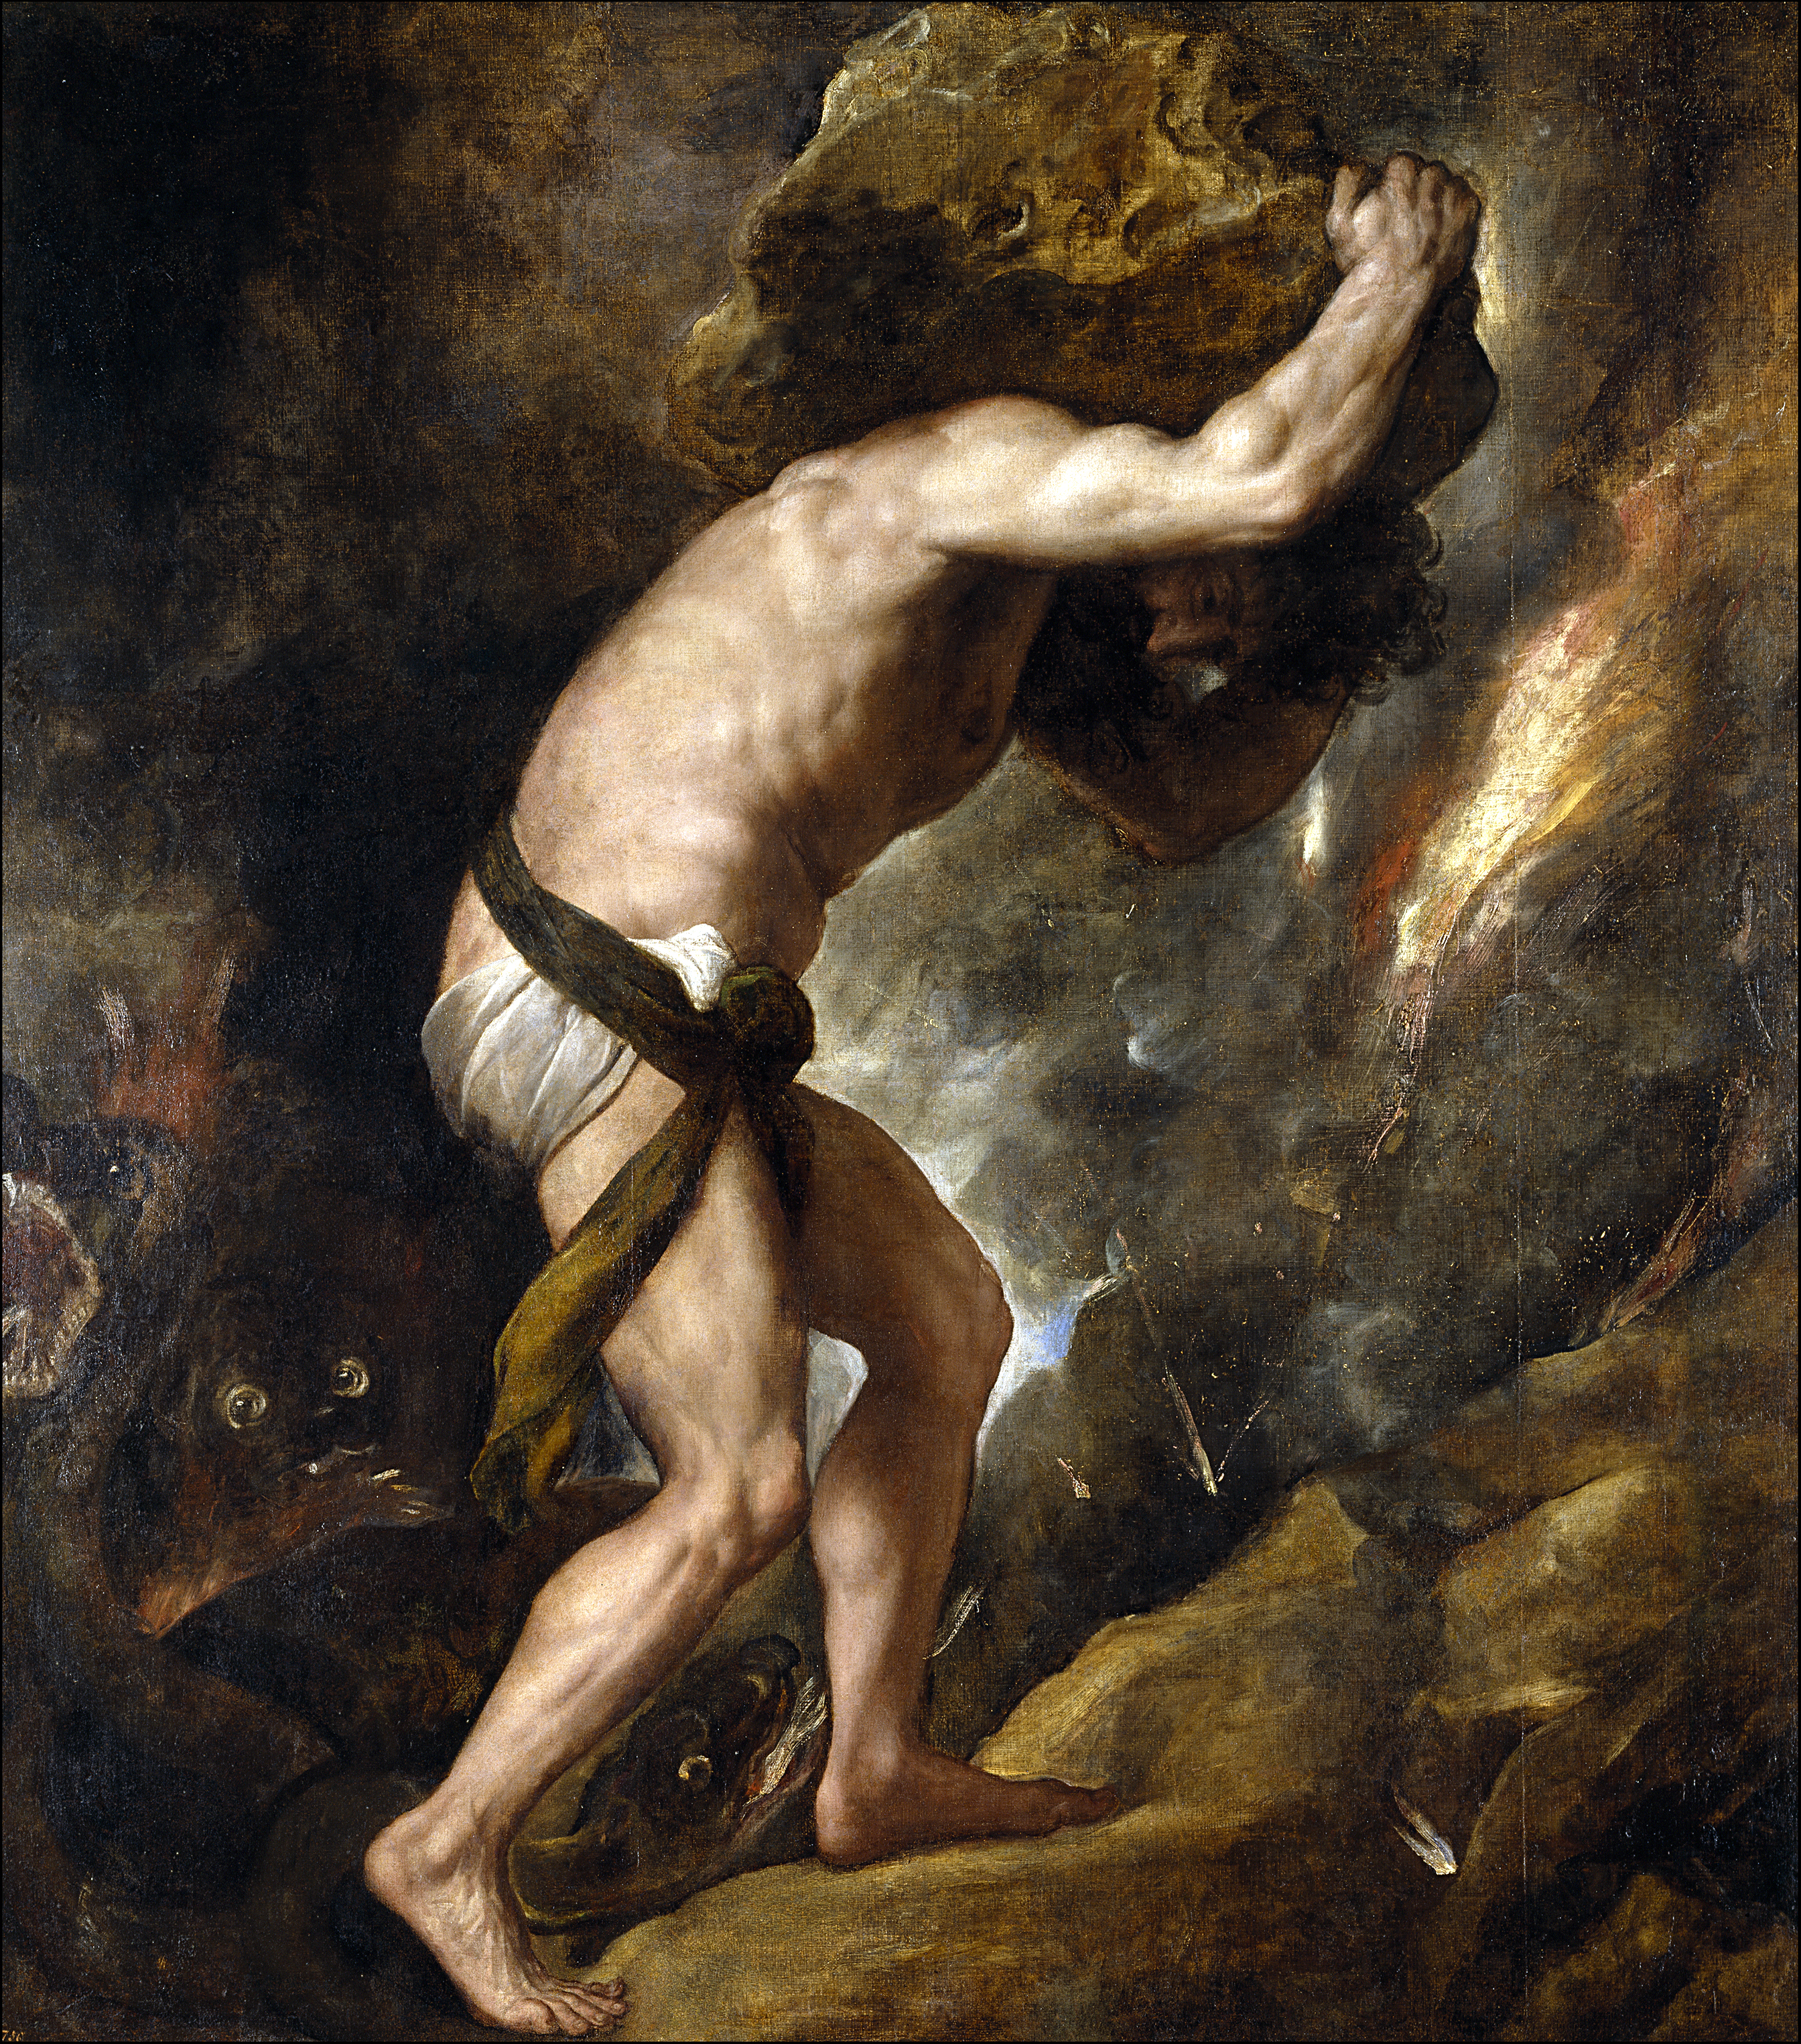 A painting of Sisyphus carrying his boulder uphill.